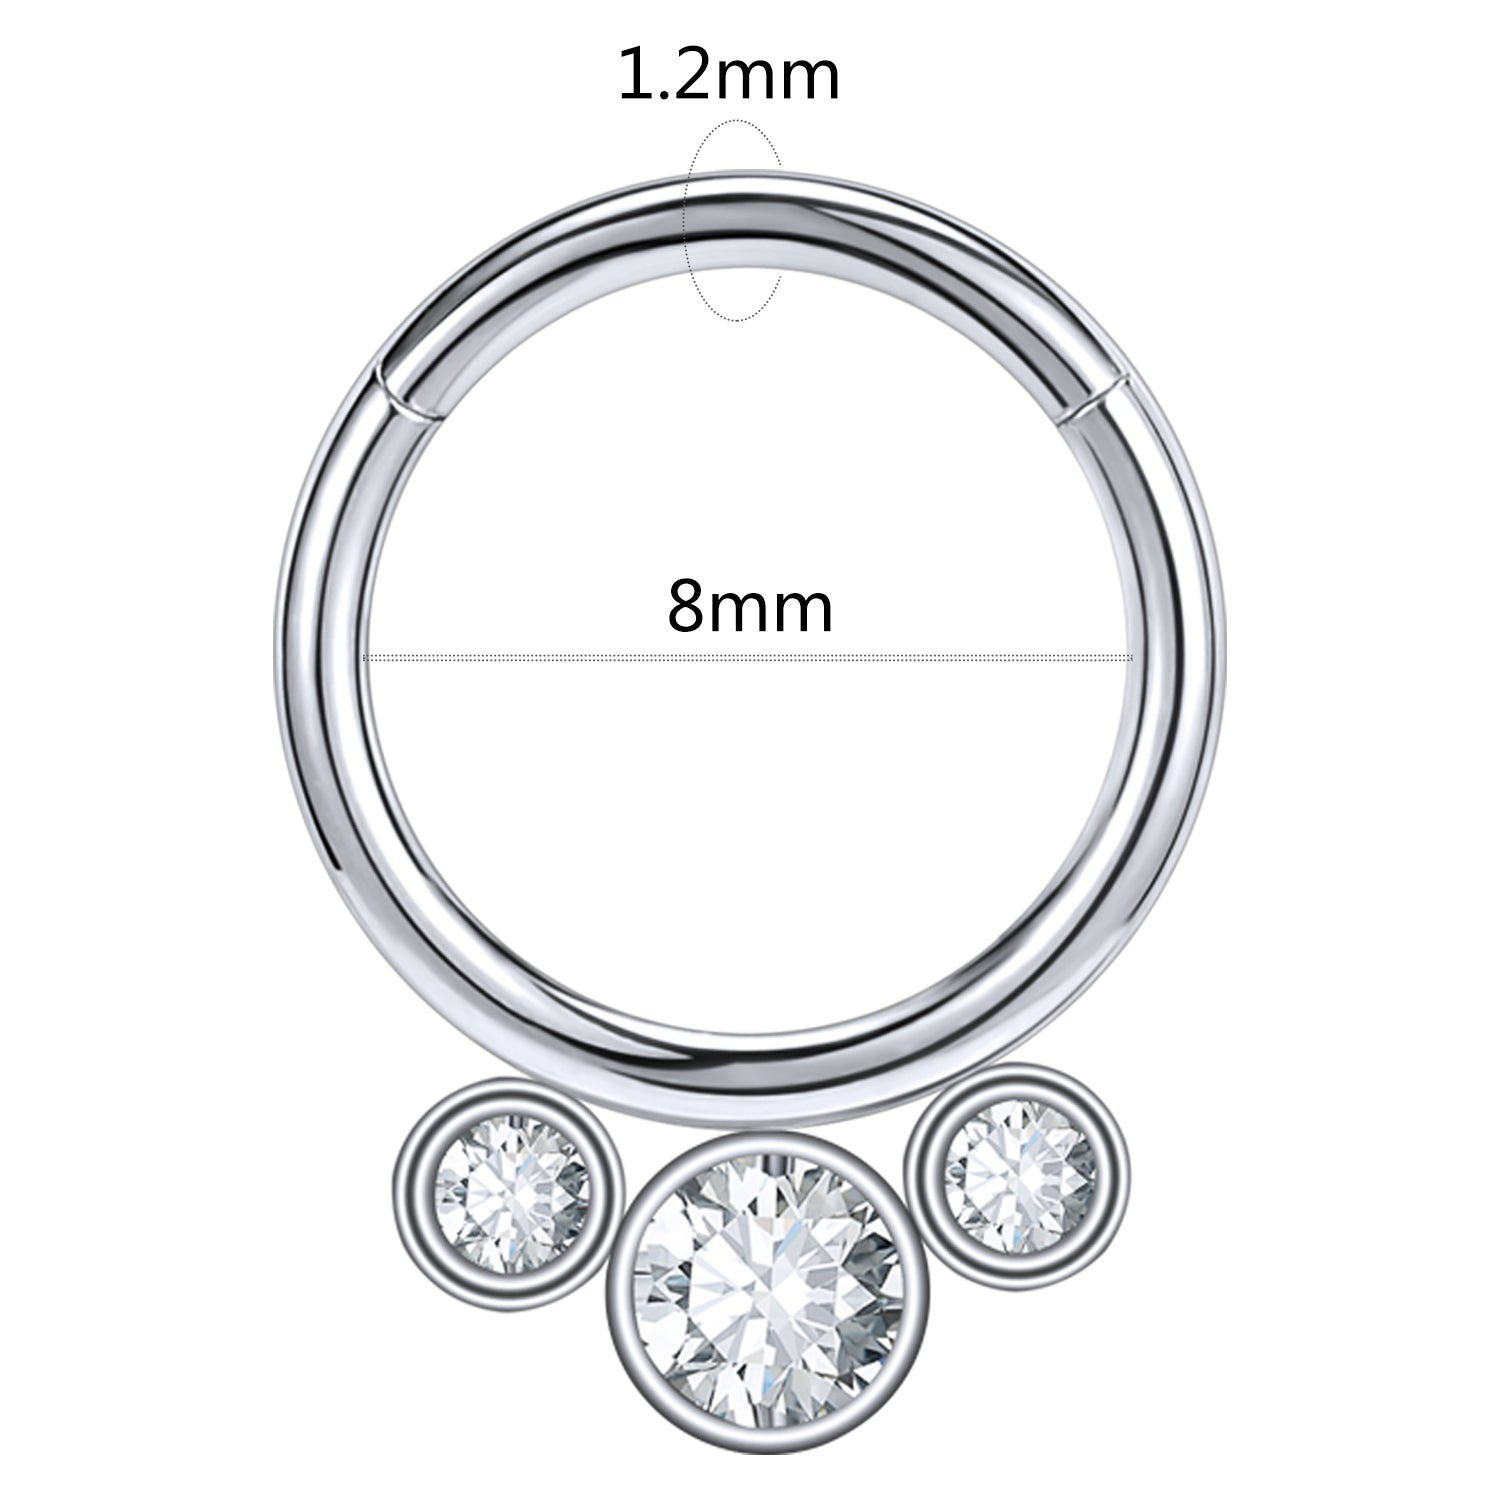 16g-round-white-crystal-nose-septum-ring-stainless-steel-clicker-helix-cartilage-piercing